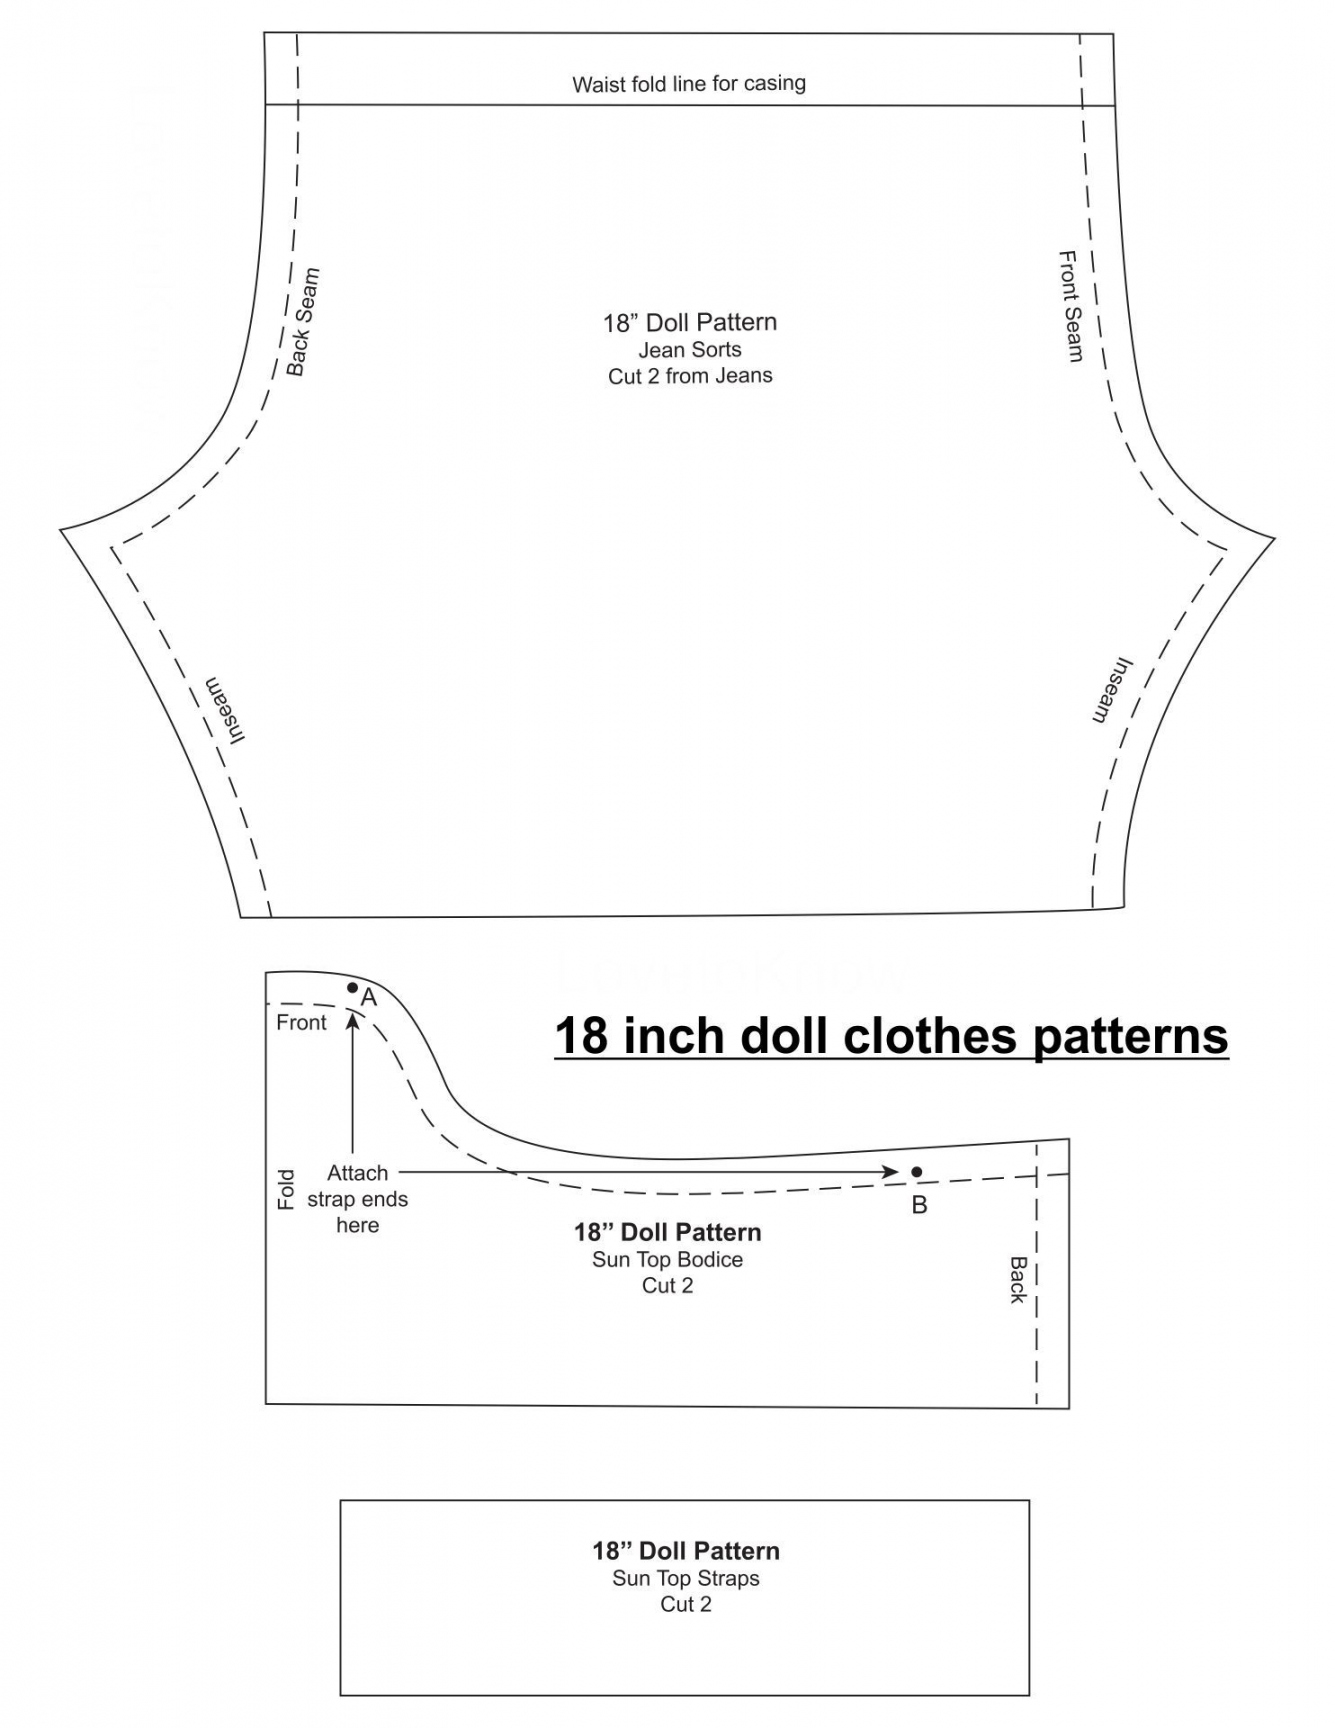 Pin on all about dolls - FREE Printables - Printable 18 Doll Clothes Patterns Free